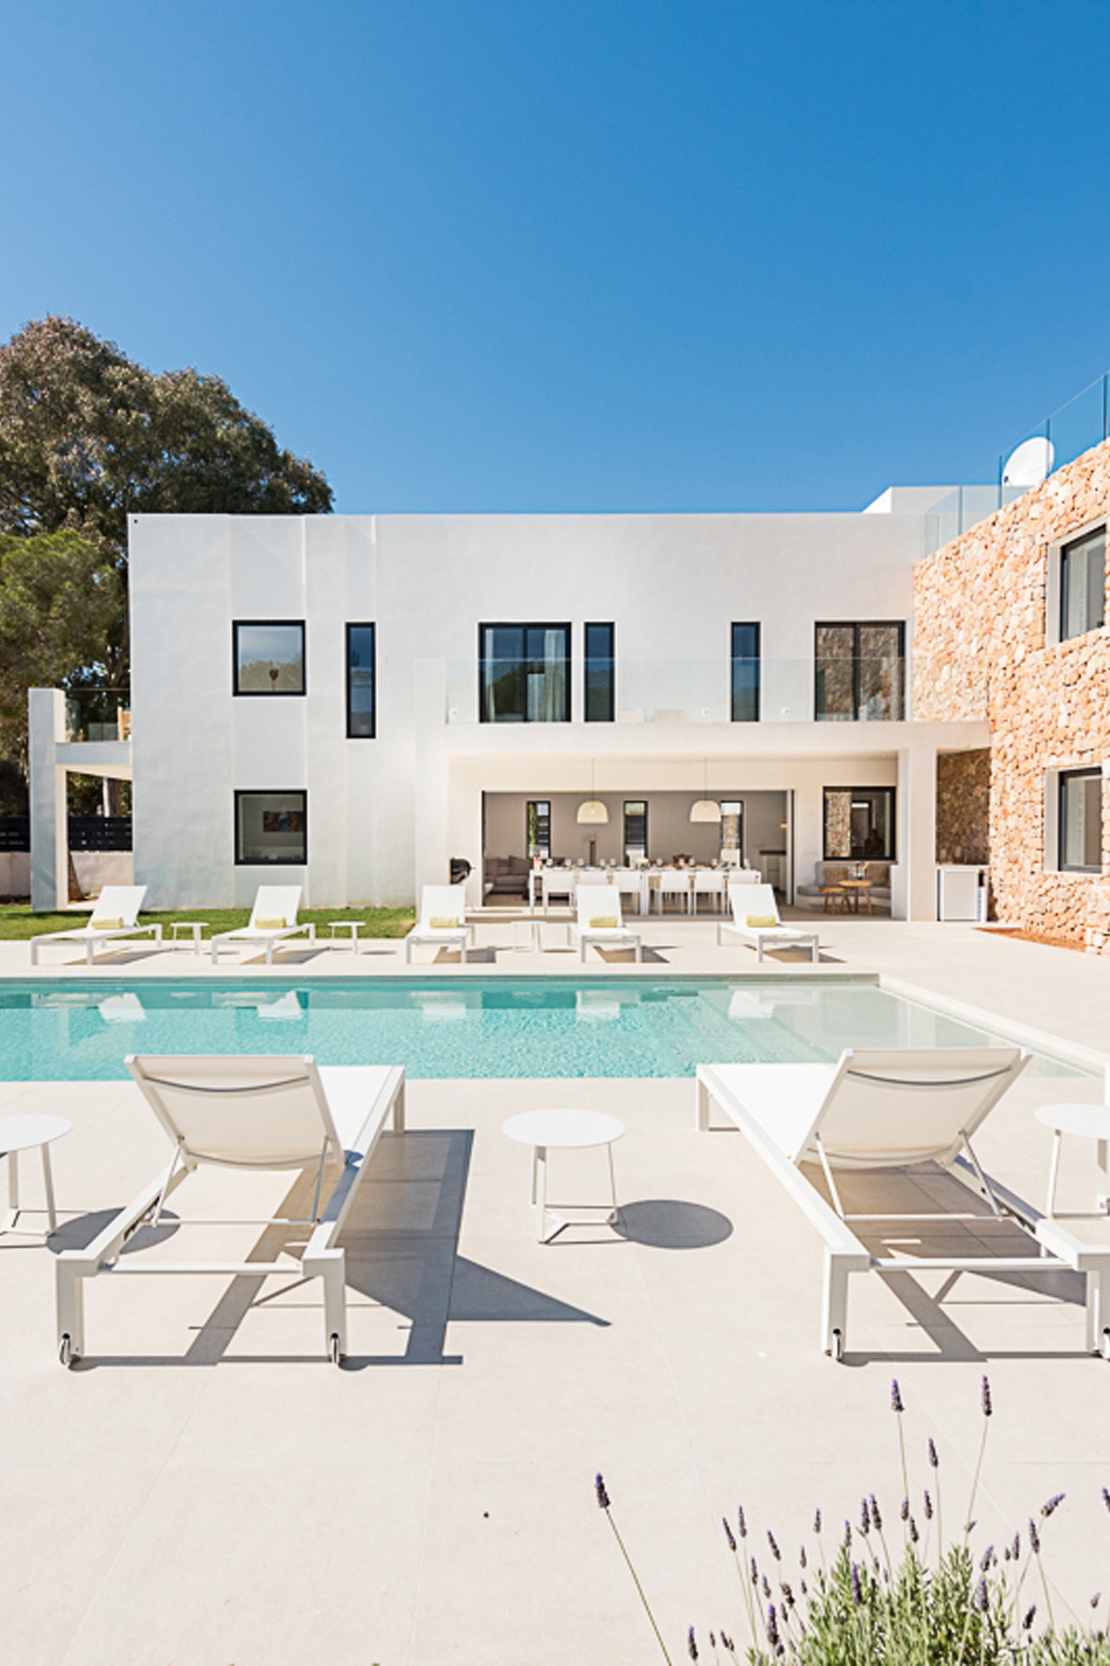 Sun loungers next to a pool at a luxury villa for sale in Ibiza